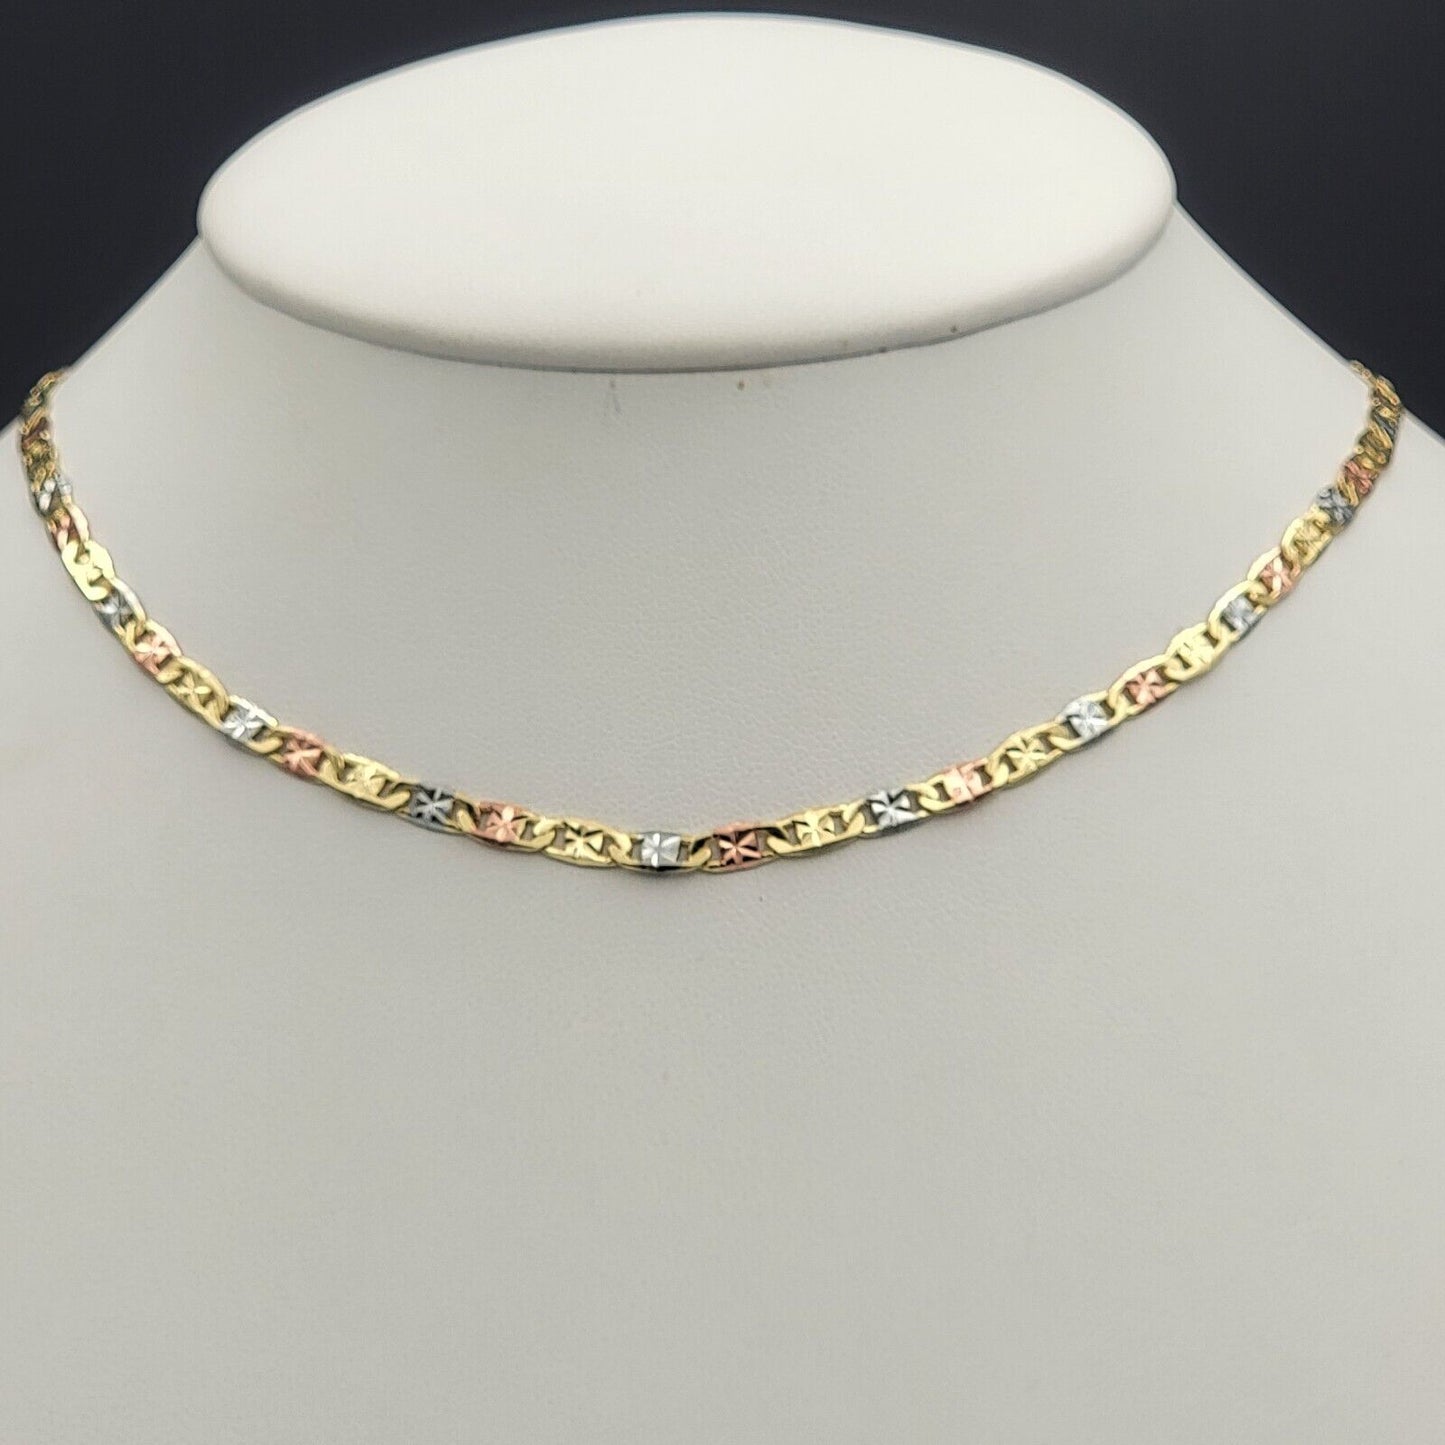 Necklaces - Tri Color Gold Plated. Mariner Style 18in Long - 4mm. Oro Laminado